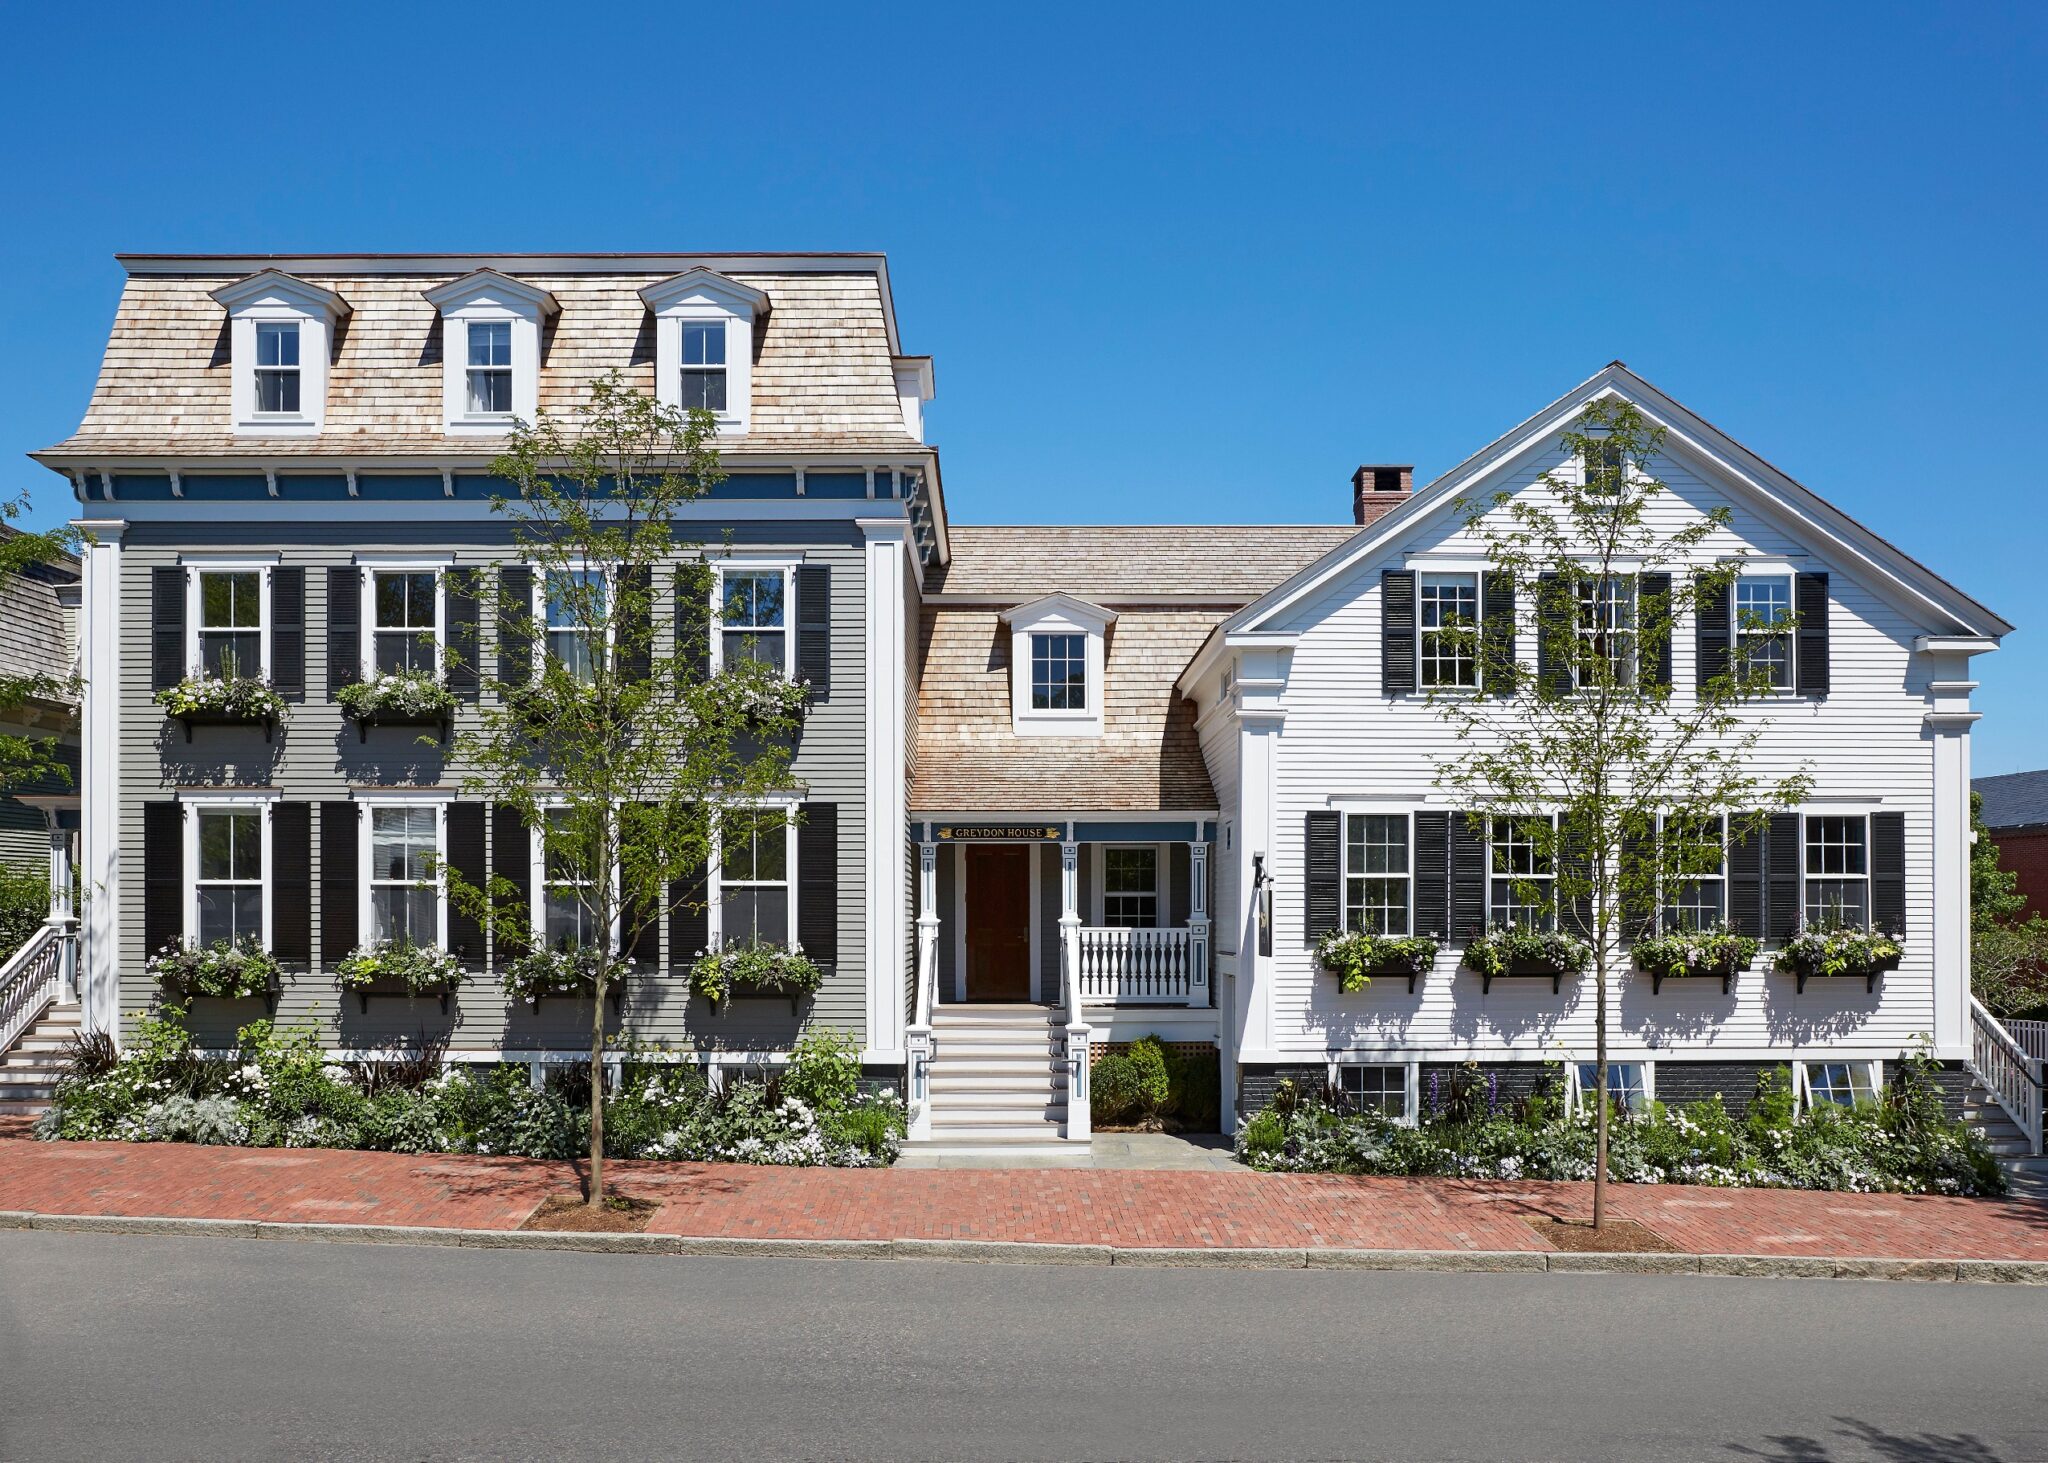 This Former Sea Captain’s Home Is Nantucket’s Most Stylish Boutique Hotel